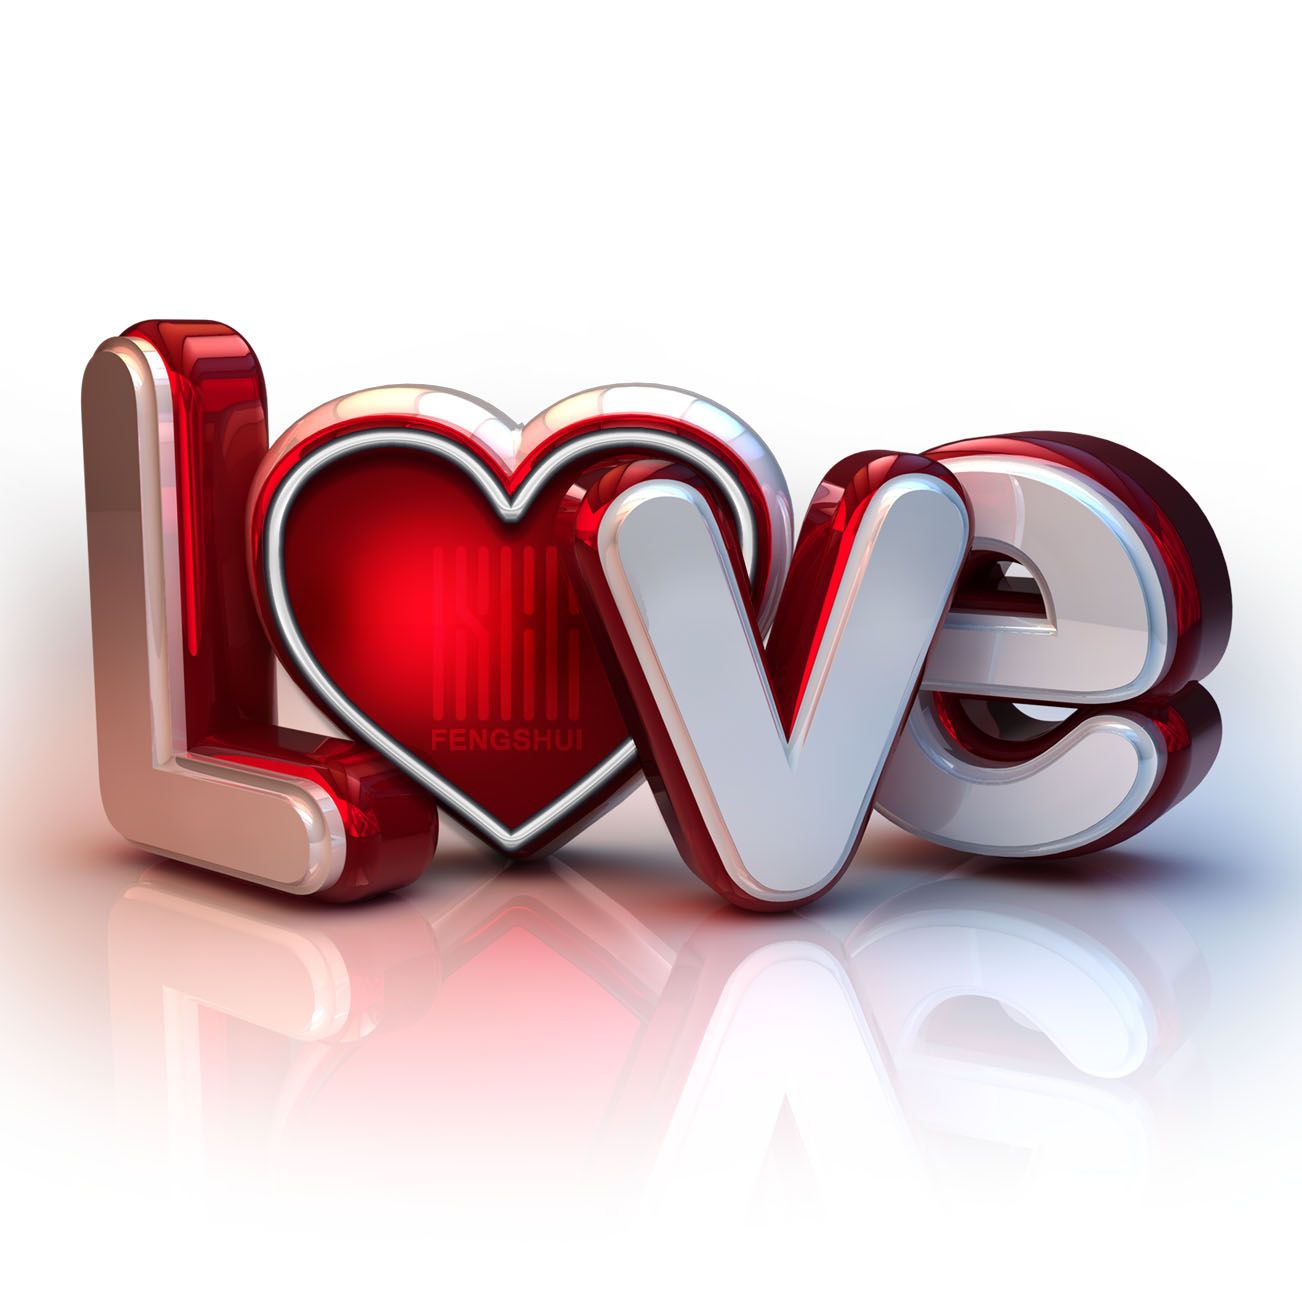 Love on-line 24 horas